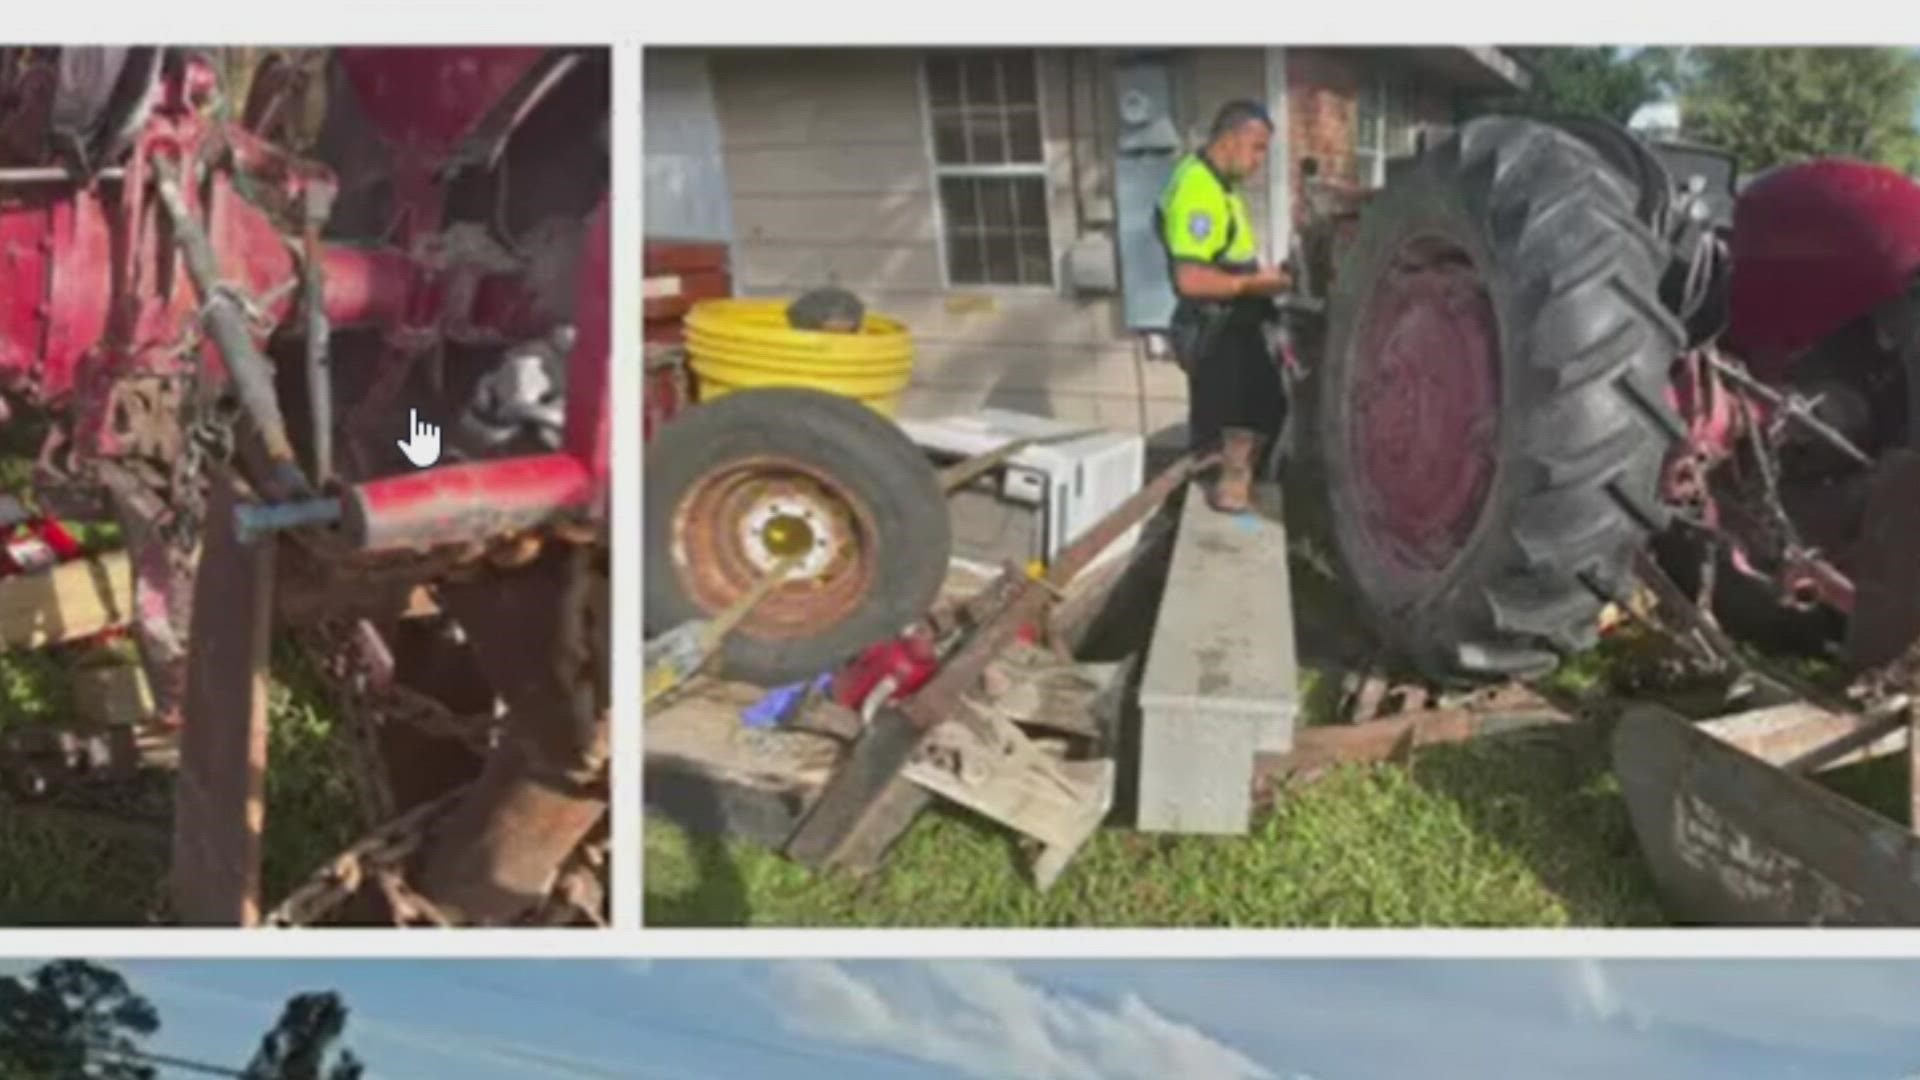 Slidell Police said that two men were doing storm recovery work when the tractor somehow kicked into gear. No one was driving it at the time of the incident.